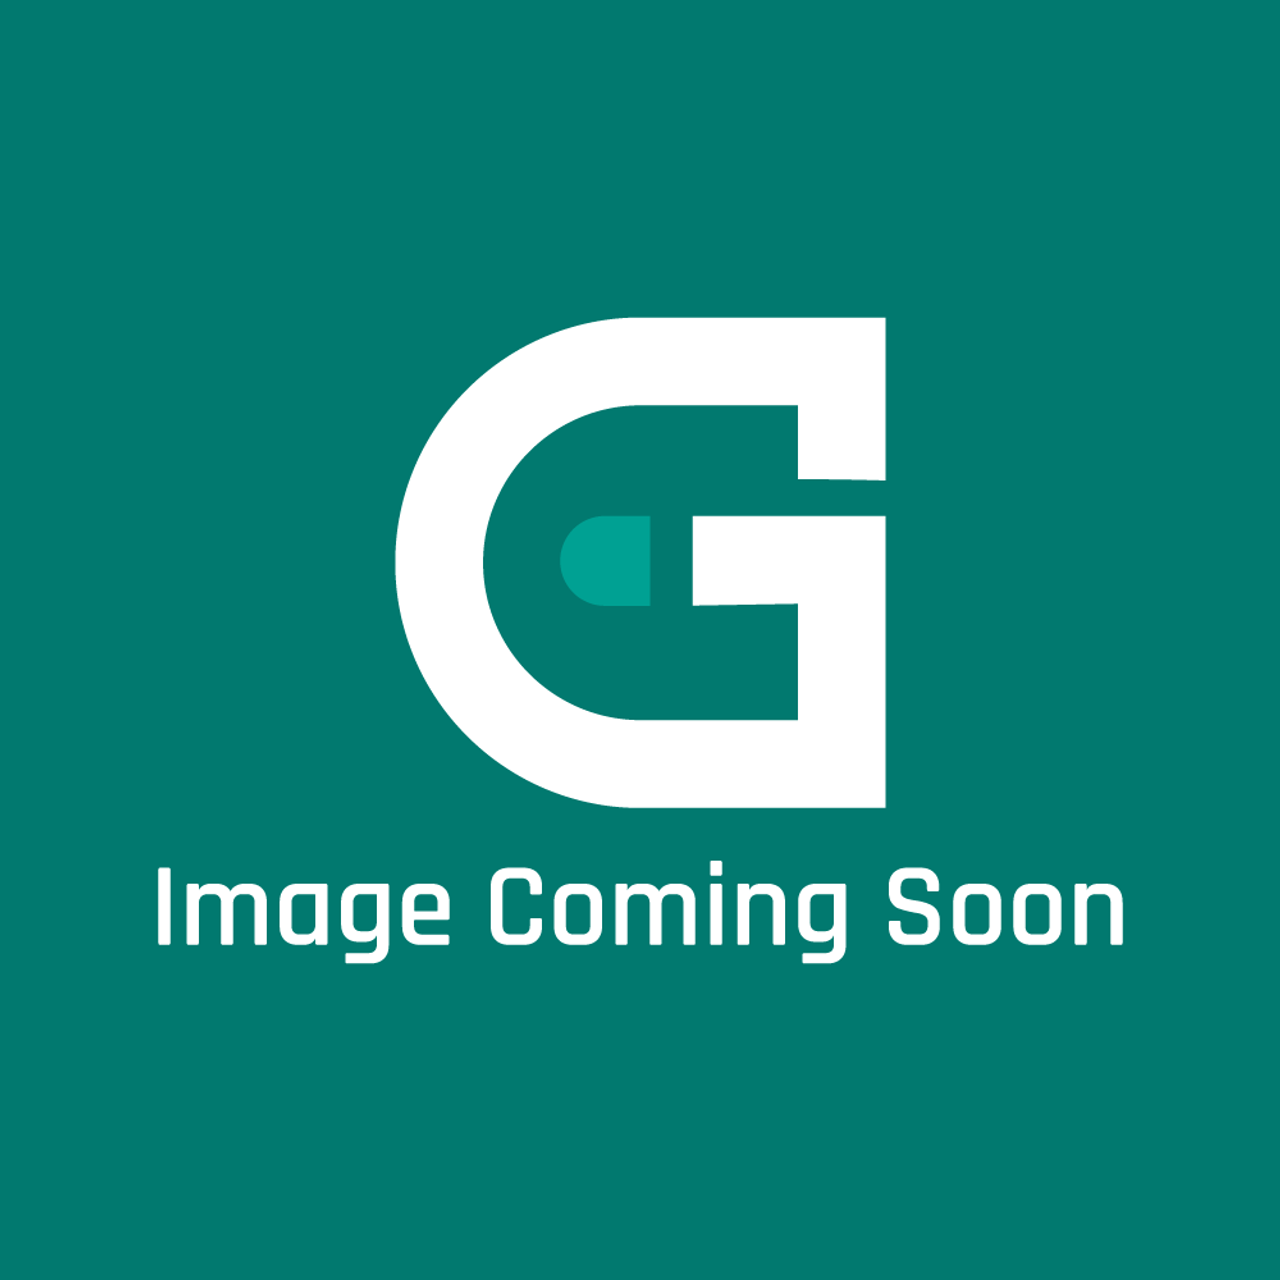 AGA Marvel AO4M997531 - Oc3 Relay Rs Ref 211-1304 - Image Coming Soon!